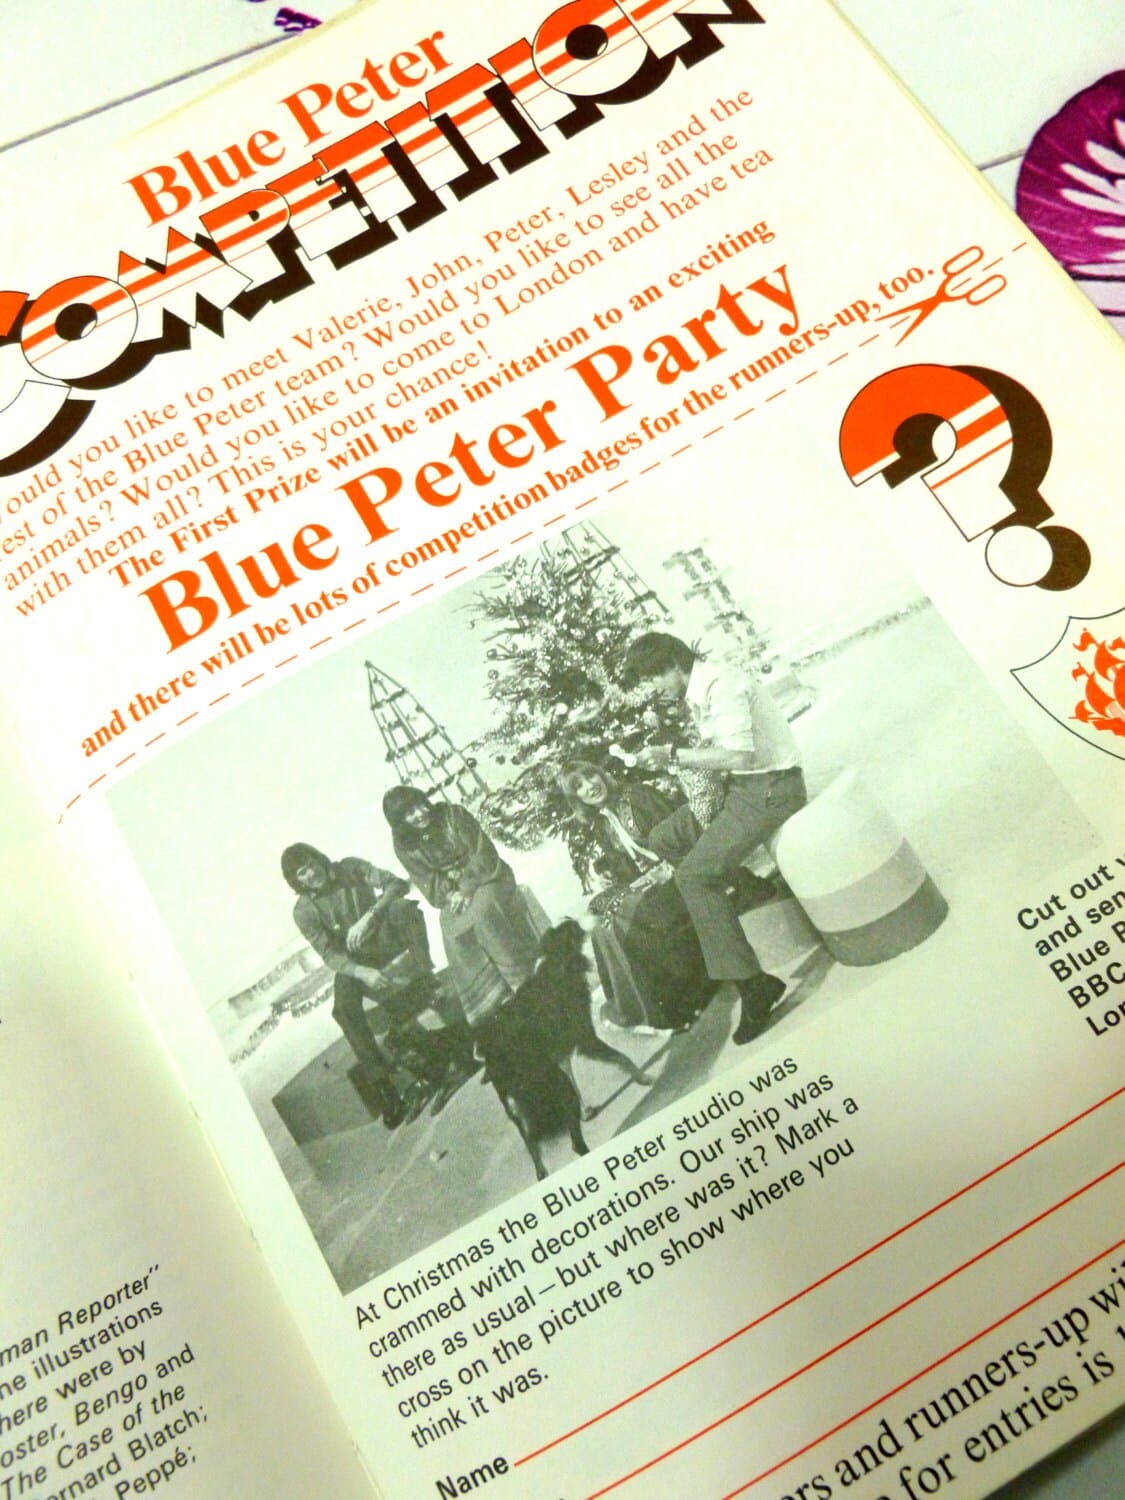 Blue Peter Tenth Book with Rare Paddington Story and Barbie or Sindy Garden Swing to make 1973 Annual